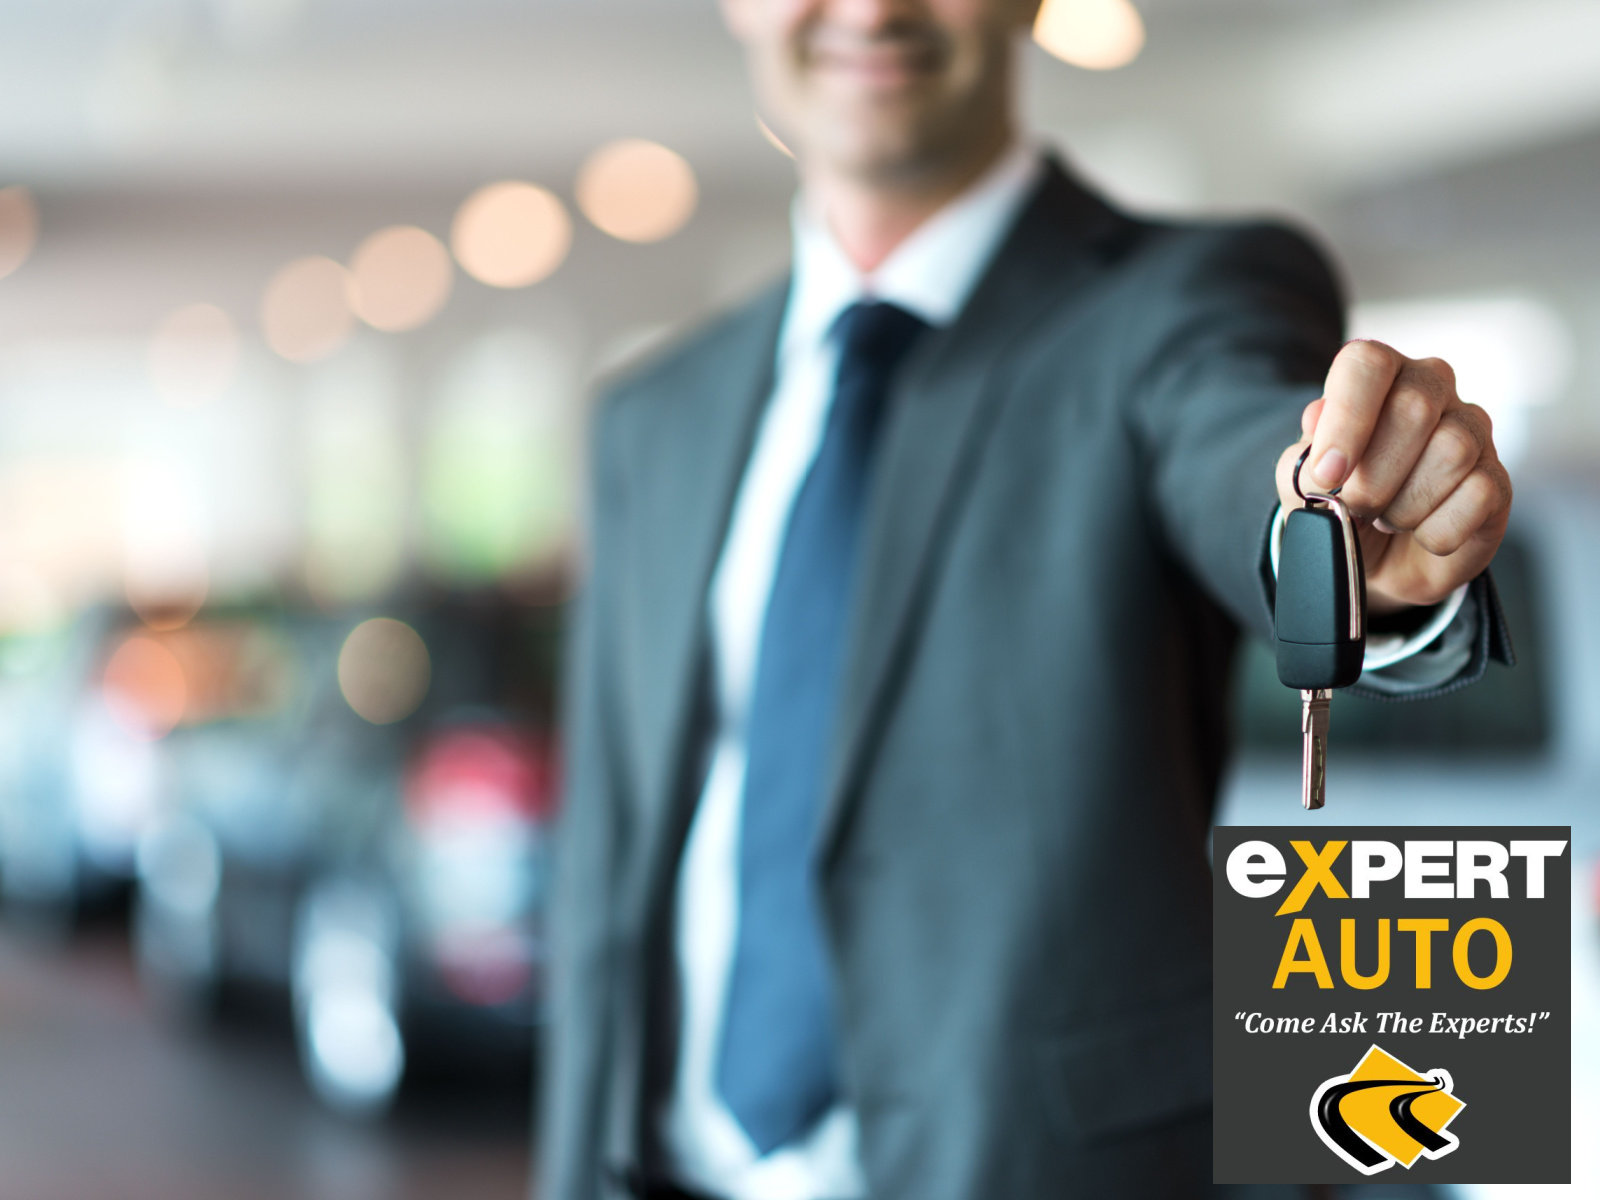 Stress-Free Car Shopping and Financing at Expert Auto in Temple Hills